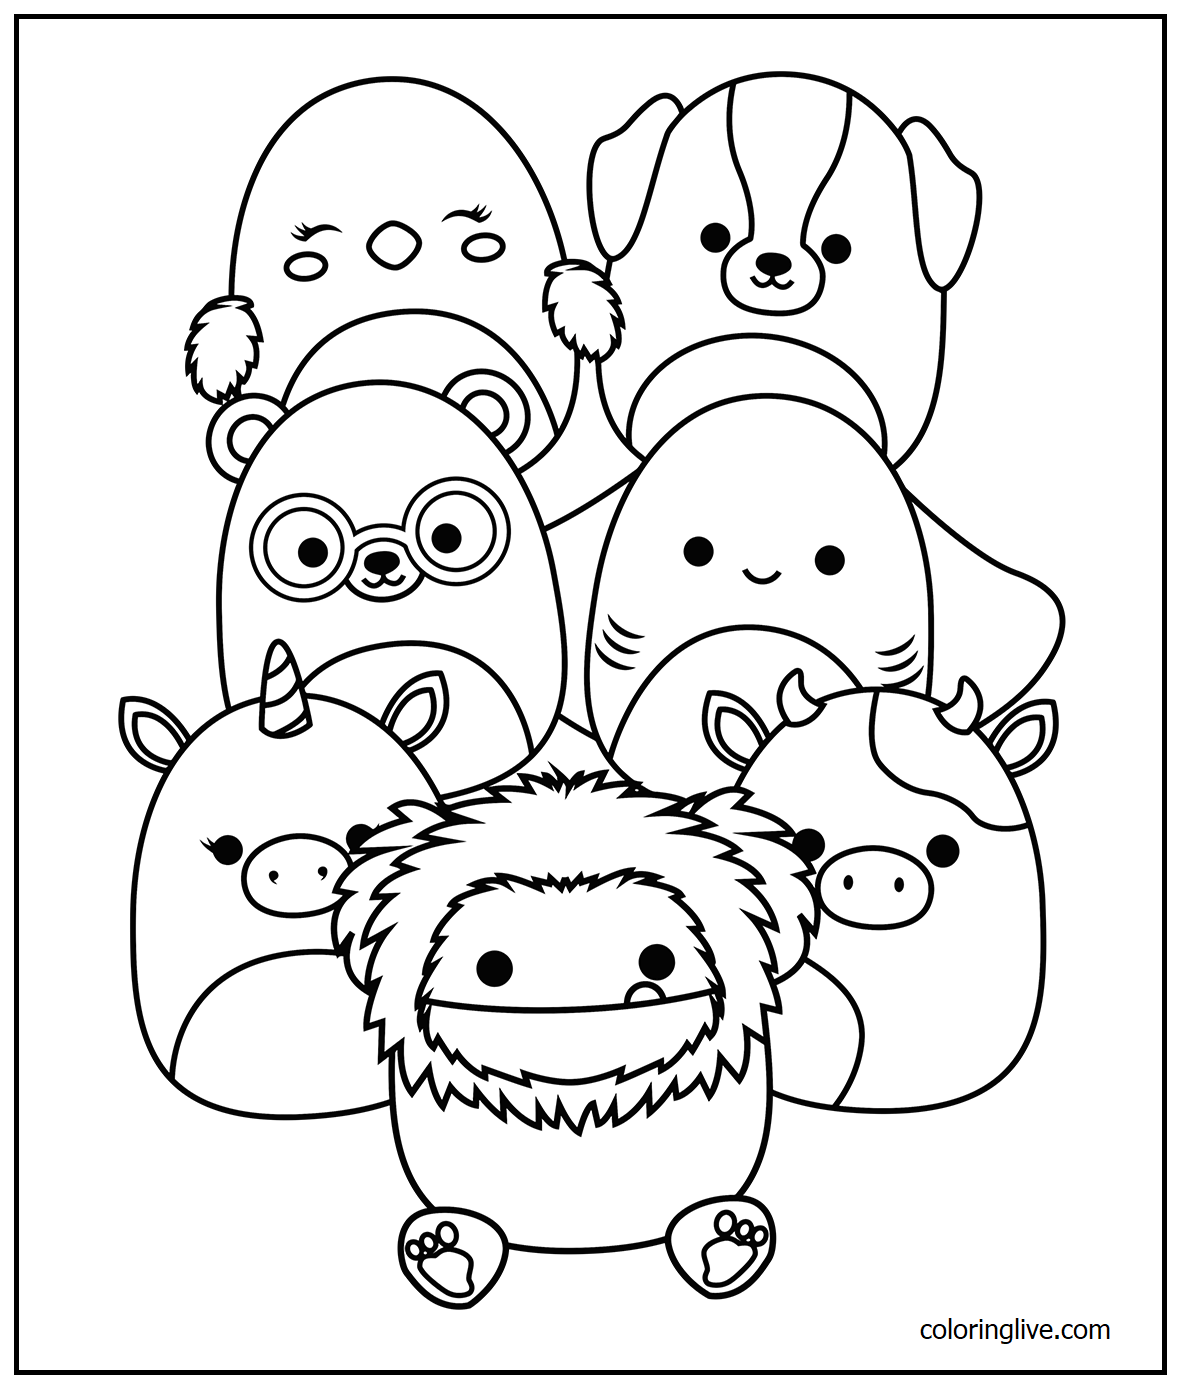 Printable Squishmallow   13 Coloring Page for kids.